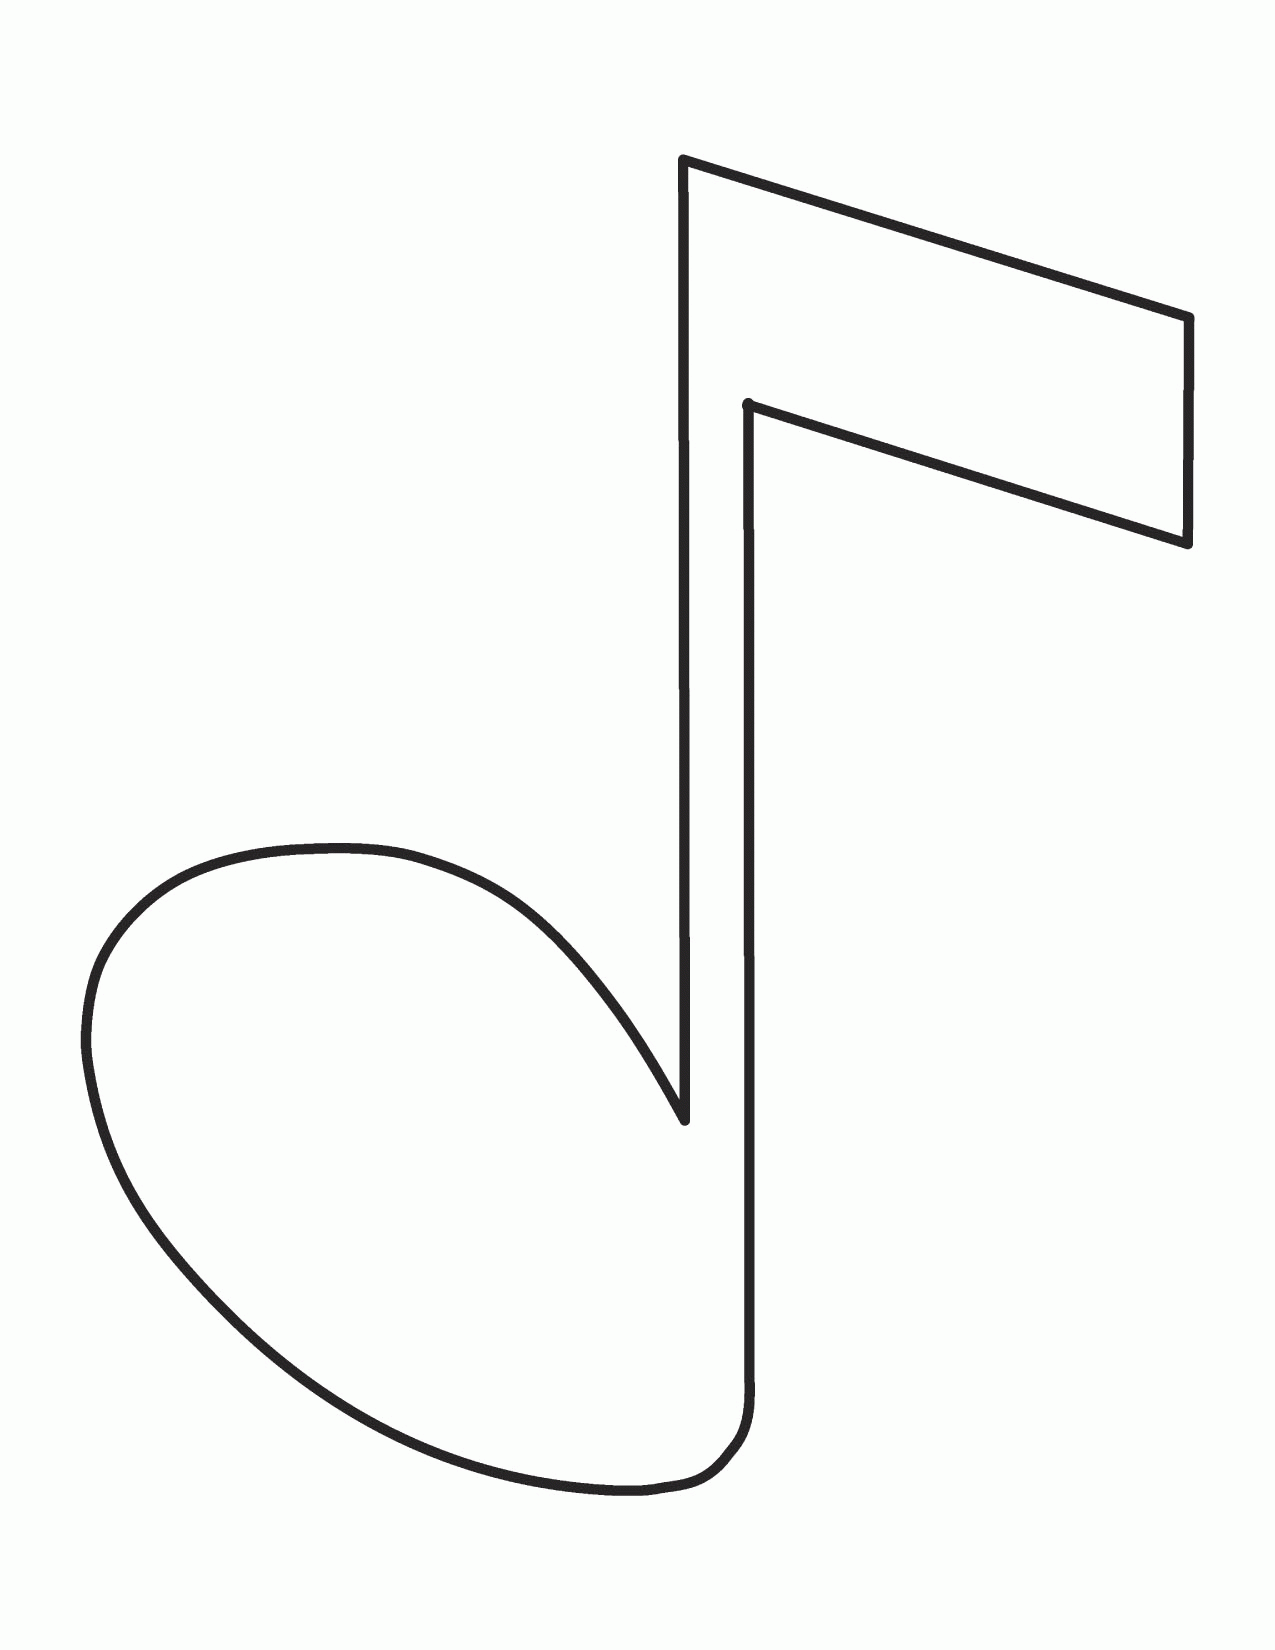 Musical Notes Coloring Pages Coloring Home